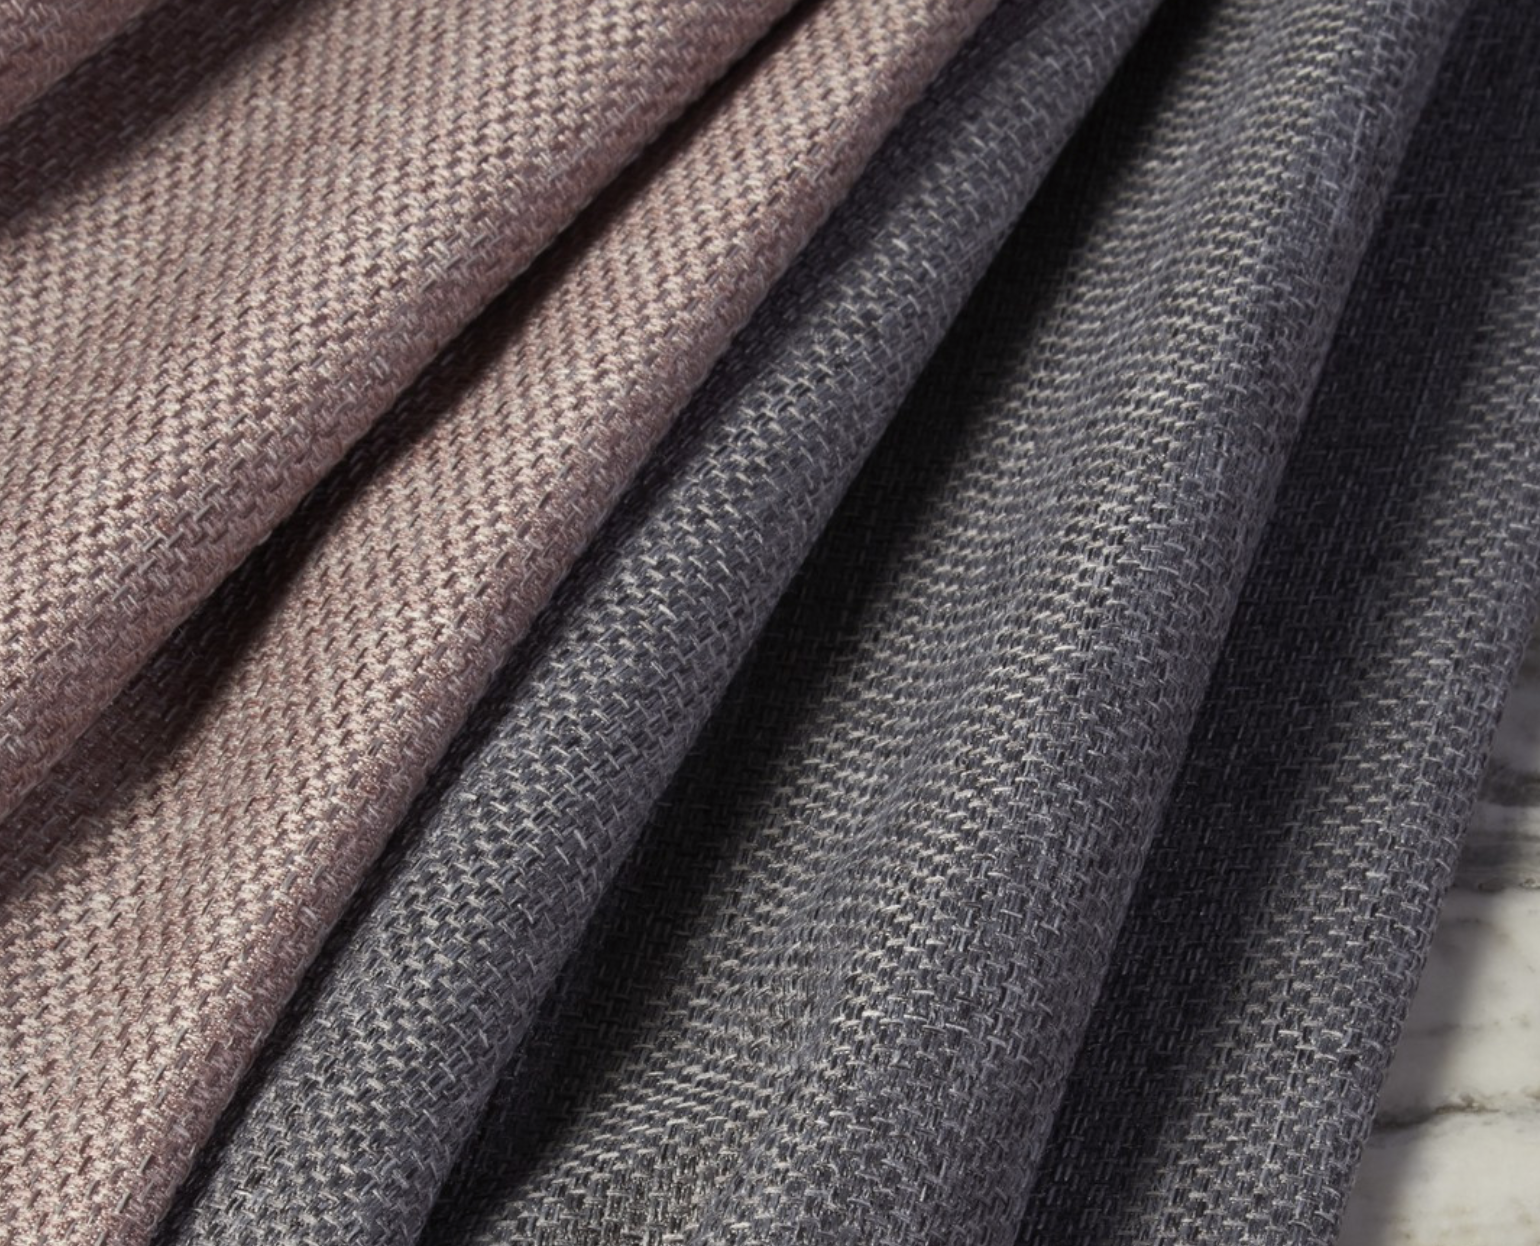 Our Guide to Flame-Retardant Fabric - What to Know - DF Blog